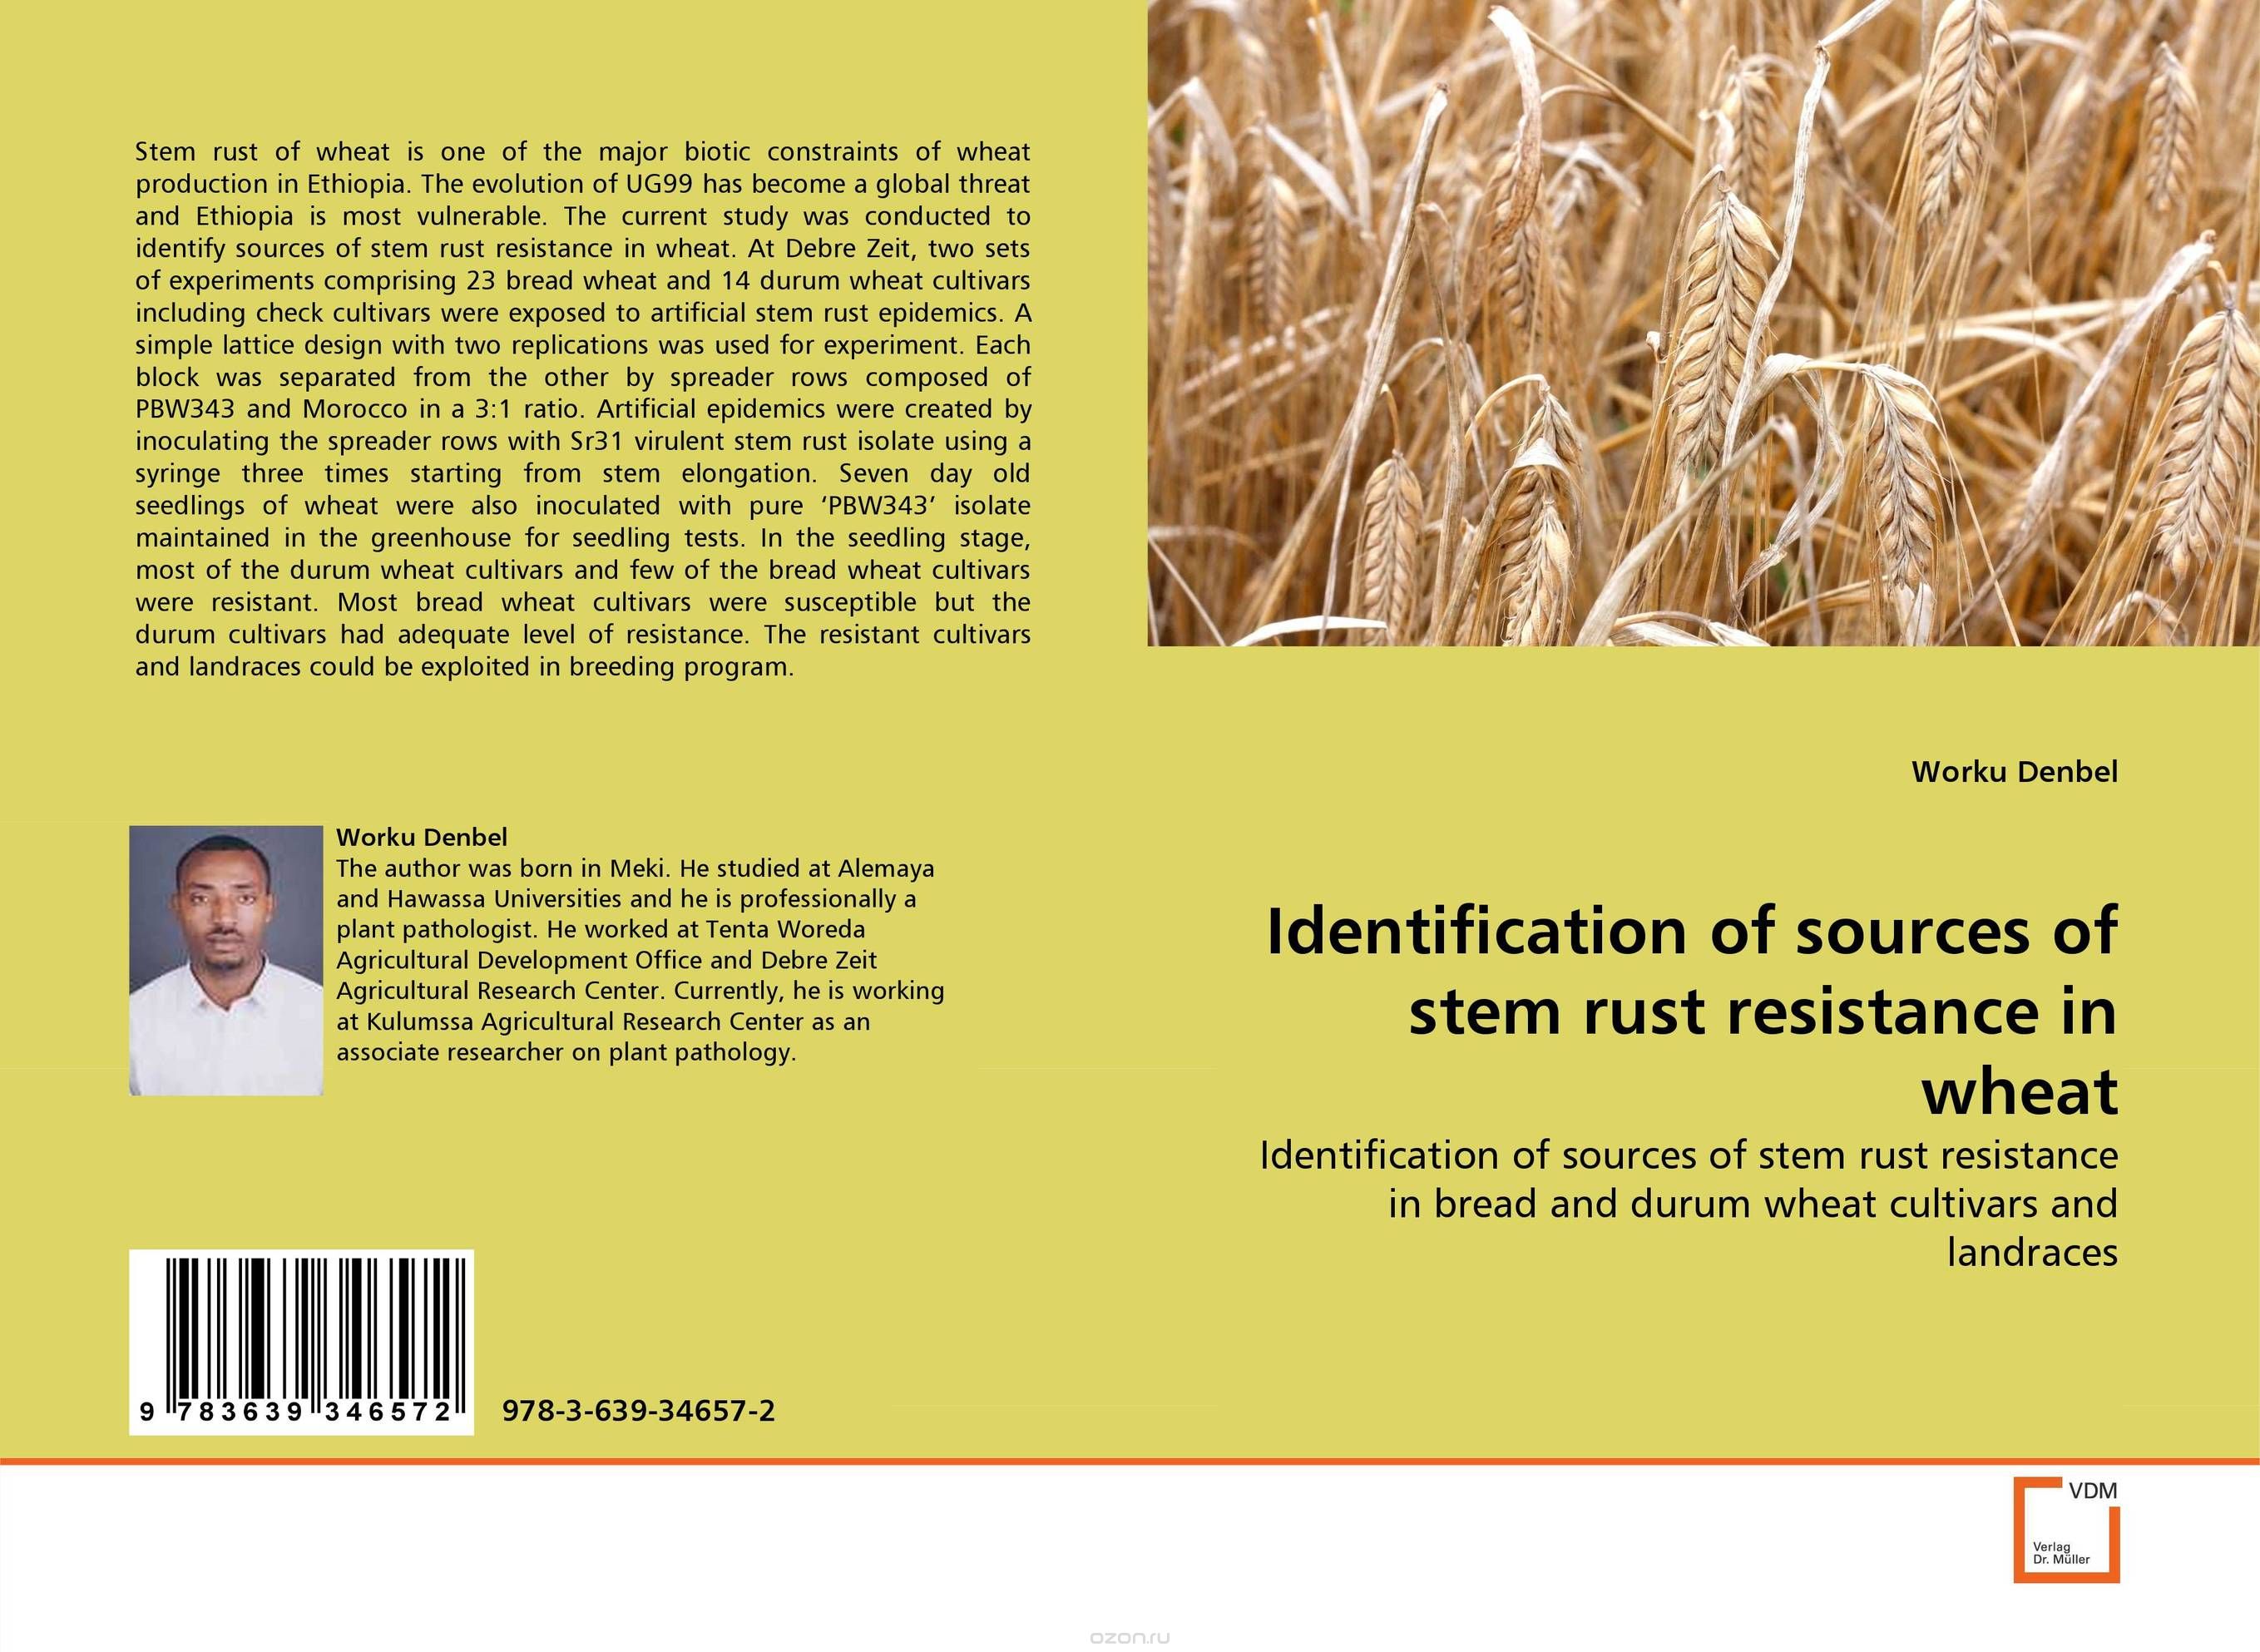 Identification of sources of stem rust resistance in wheat